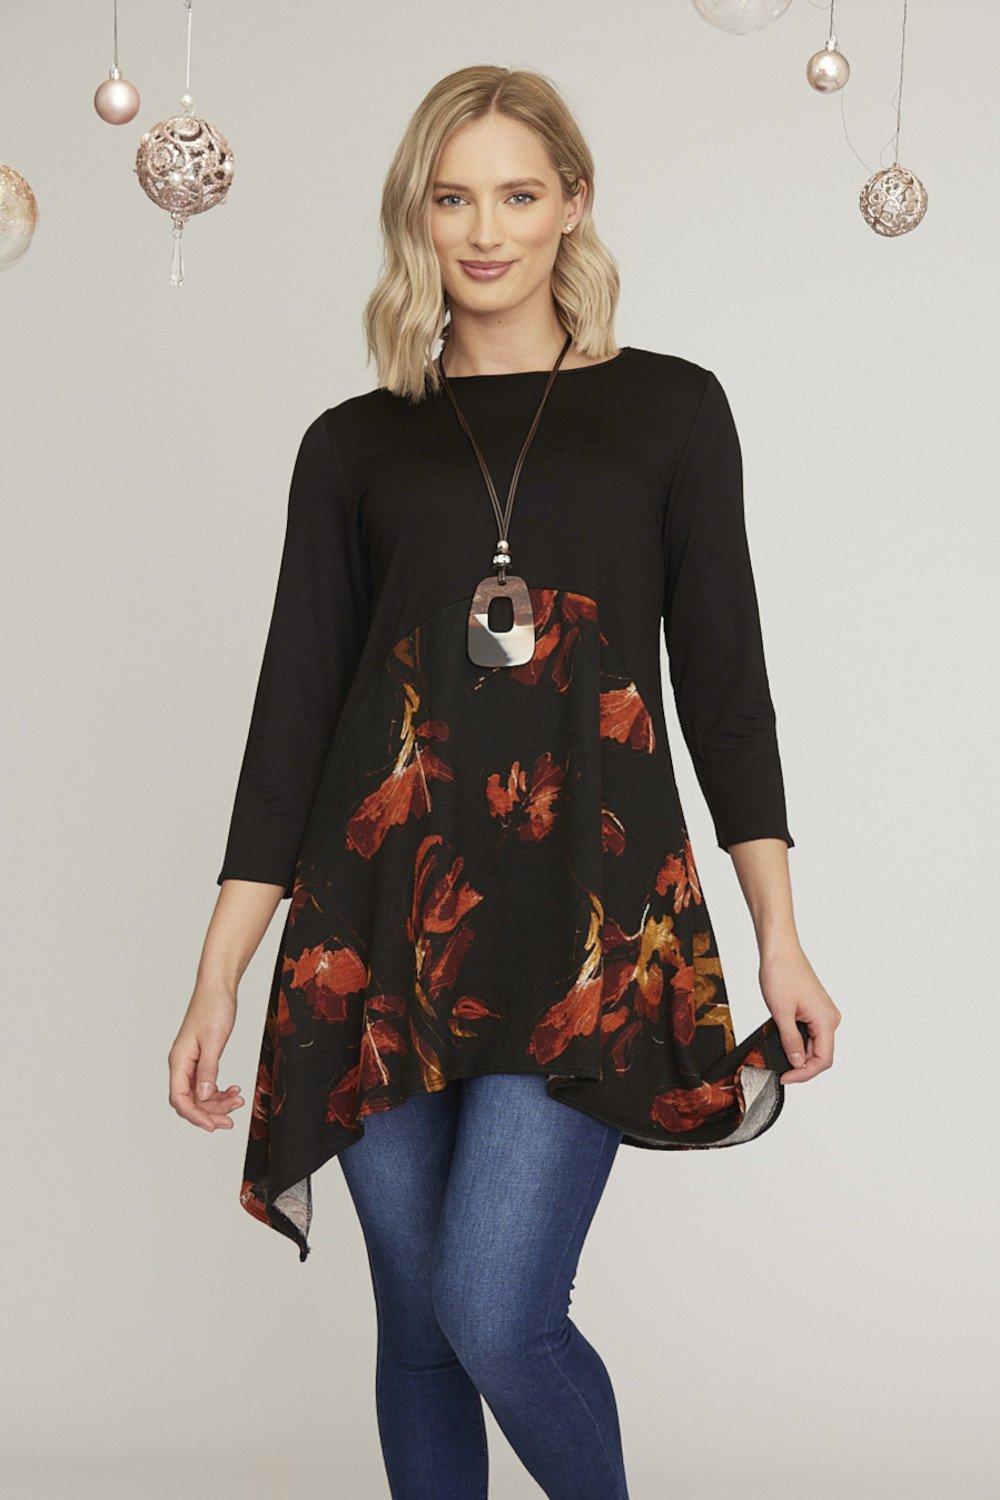 Autumn Leaves Print Tunic Dress with Necklace